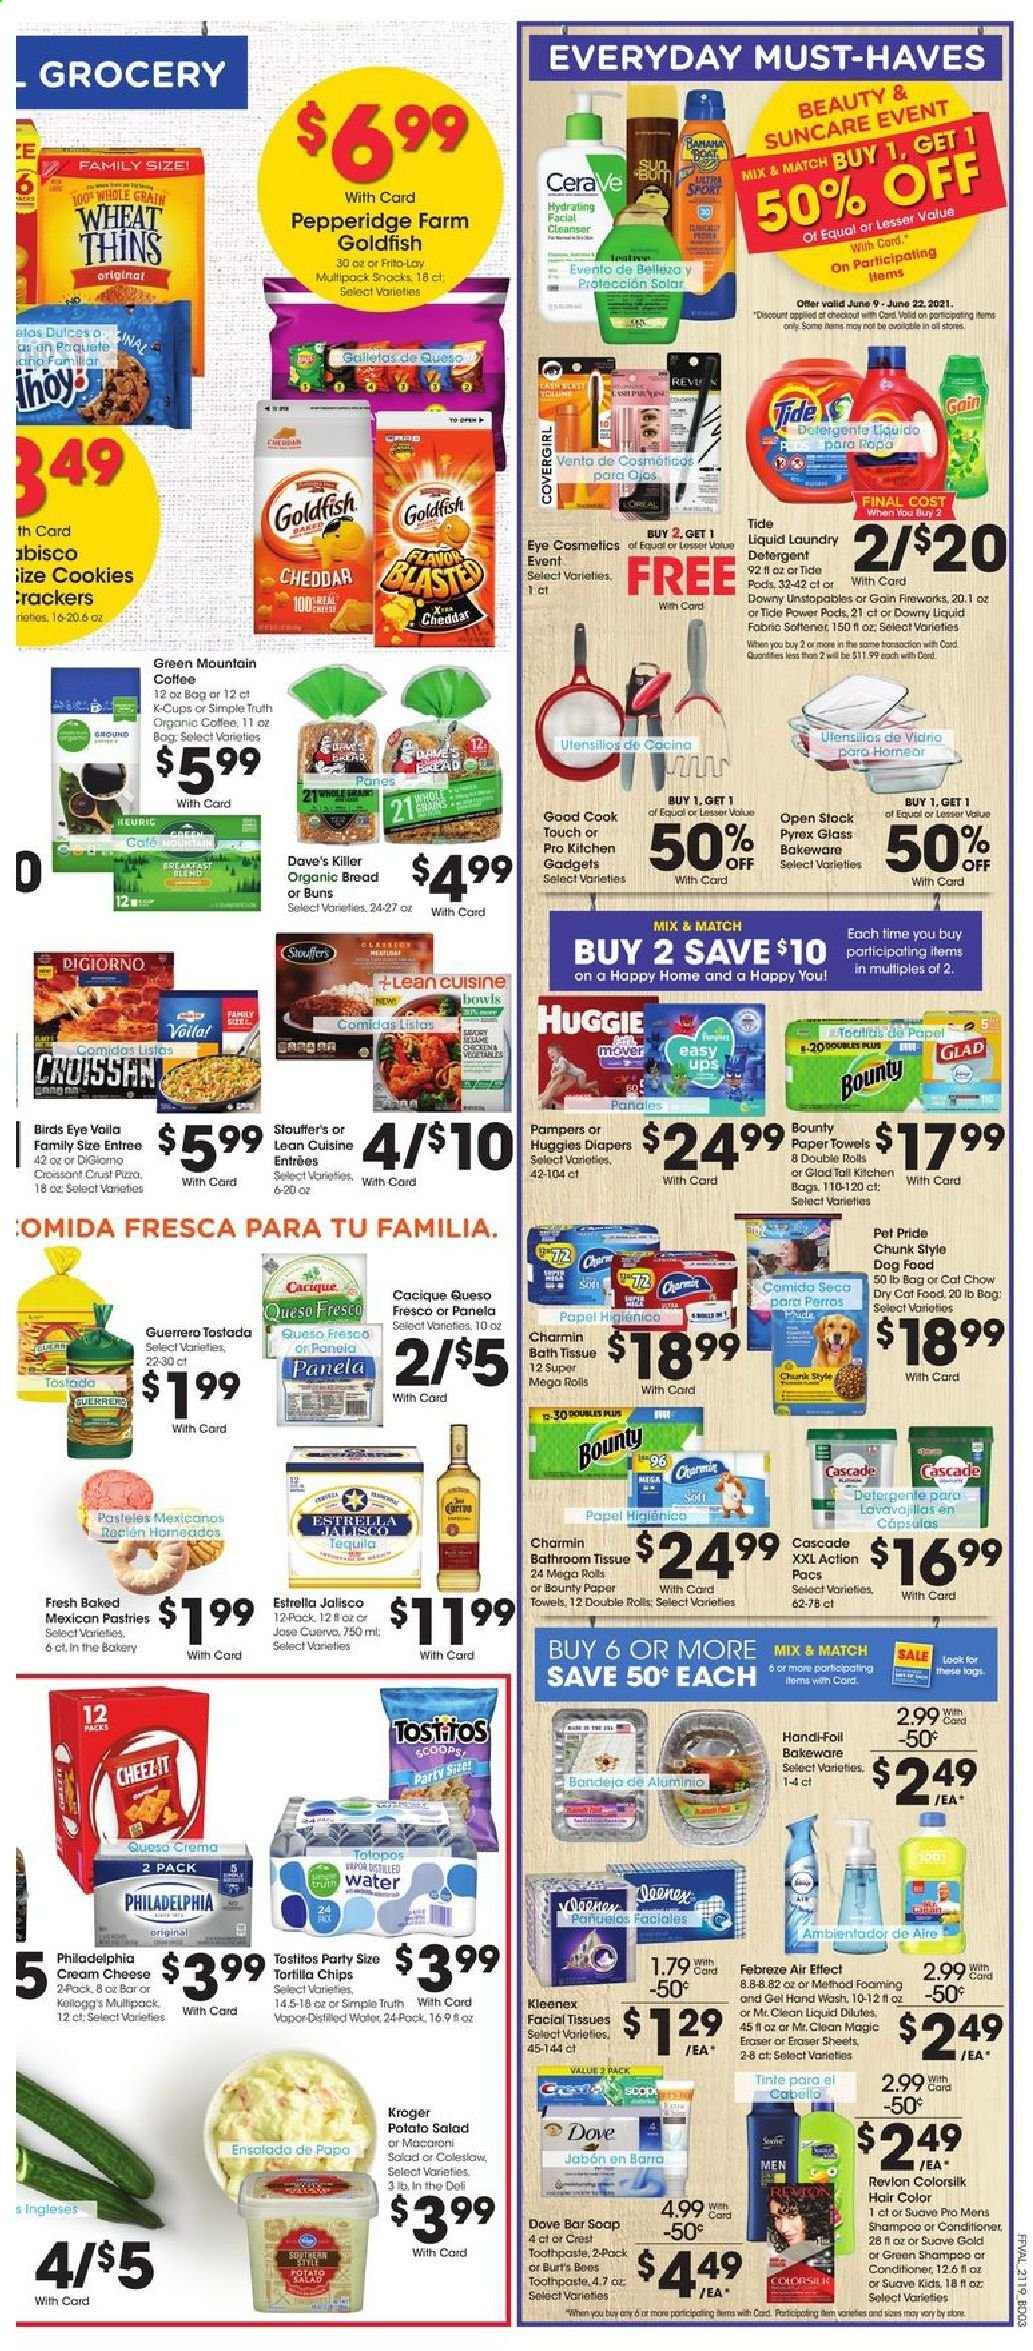 thumbnail - Fry’s Flyer - 06/09/2021 - 06/15/2021 - Sales products - bread, buns, coleslaw, pizza, Bird's Eye, Lean Cuisine, potato salad, macaroni salad, cream cheese, Philadelphia, queso fresco, Stouffer's, cookies, Bounty, tortilla chips, chips, Thins, Goldfish, Frito-Lay, Tostitos, organic coffee, coffee capsules, K-Cups, Green Mountain, tequila, Huggies, nappies, Dove, bath tissue, Kleenex, kitchen towels, paper towels, Charmin, detergent, Febreze, Gain, Cascade, Tide, Unstopables, fabric softener, Downy Laundry, shampoo, Suave, hand wash, soap bar, soap, toothpaste, Crest, CeraVe, cleanser, facial tissues, conditioner, Revlon, hair color, bakeware, Pyrex, eraser, animal food, cat food, dog food, dry cat food. Page 6.